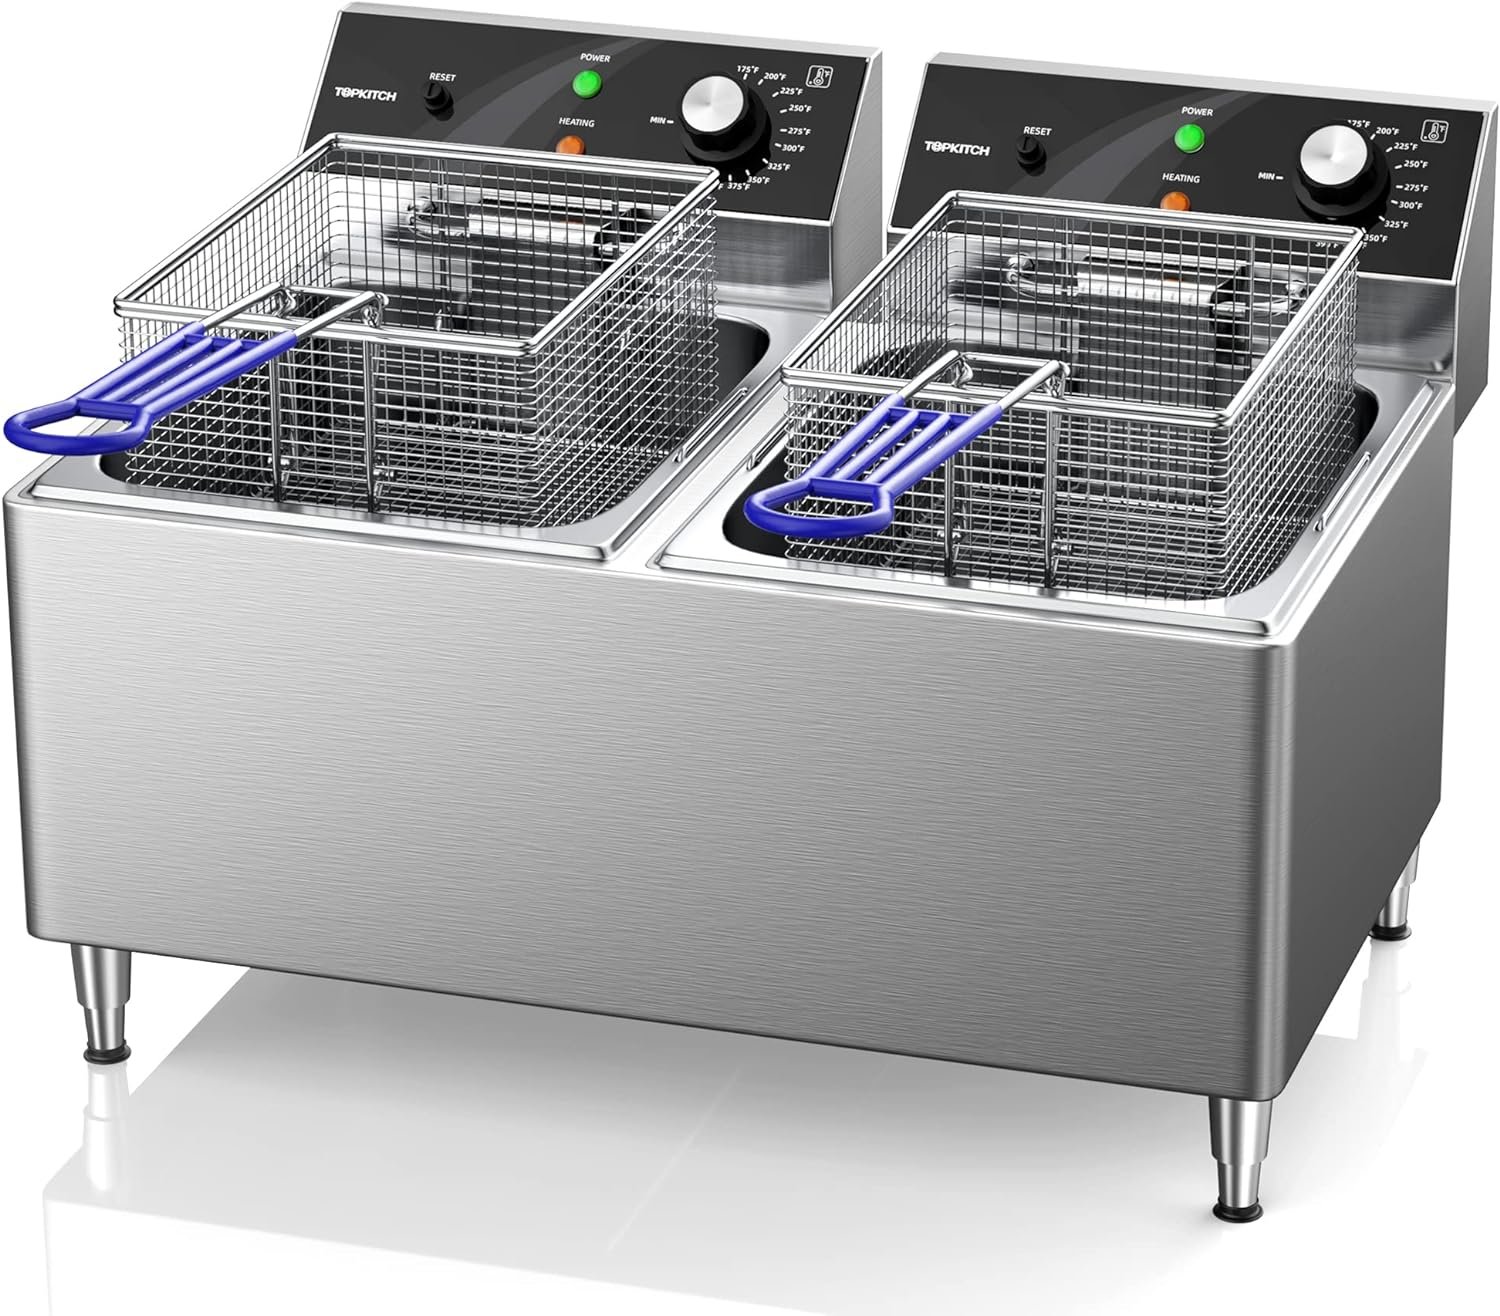 TOPKITCH Electric Commercial Deep fryer 12L x 2 Dual Tank with 2 Frying Baskets and Lids Countertop Fryer for Restaurant with 3300W, 240V, 6-15 Phase Plugs